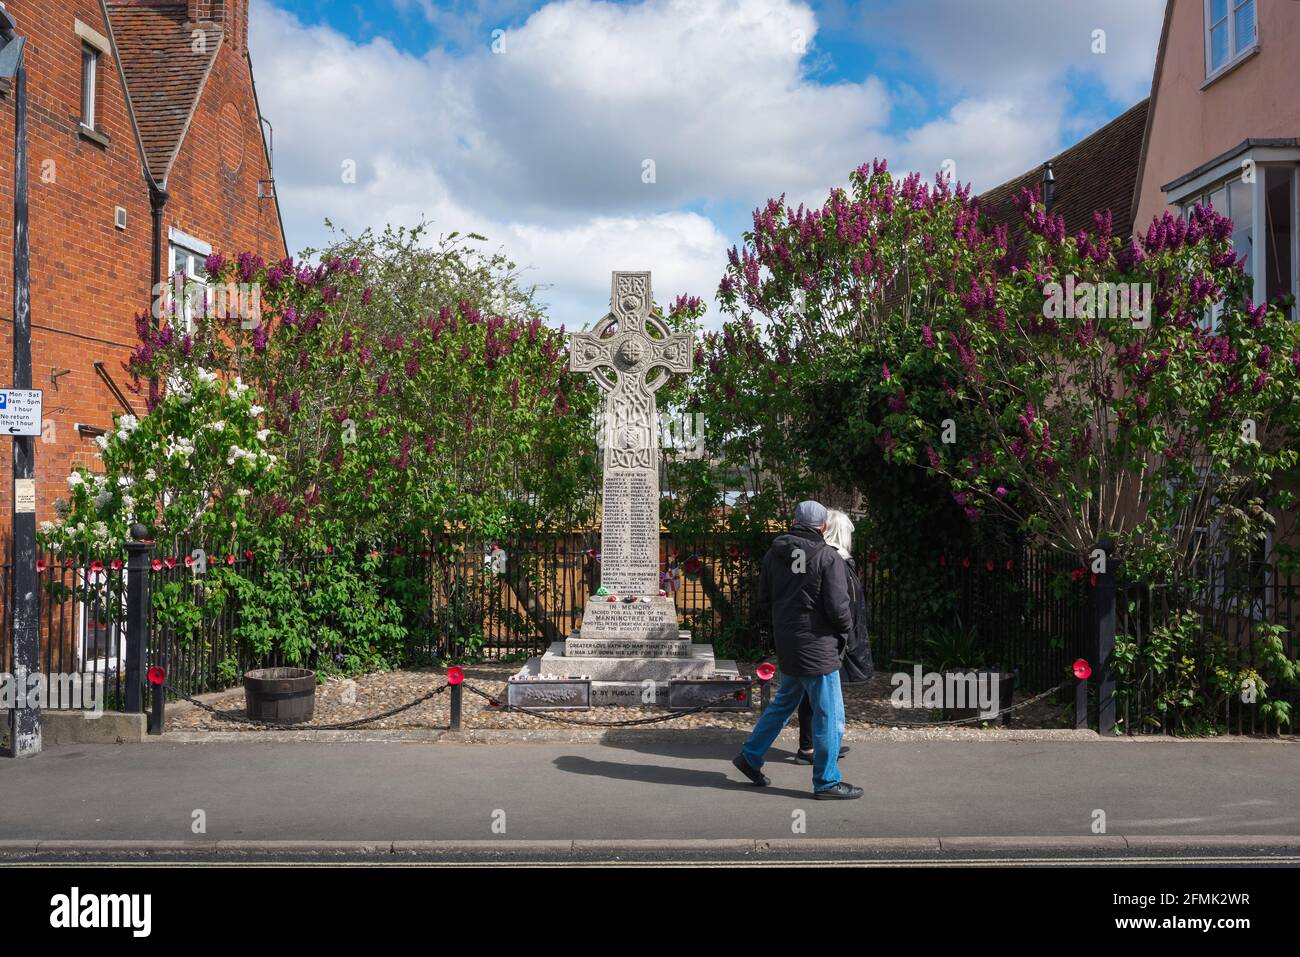 War memorial England, view of a middle aged couple walking past a war memorial sited in the high street of a small rural English town, Essex, UK. Stock Photo